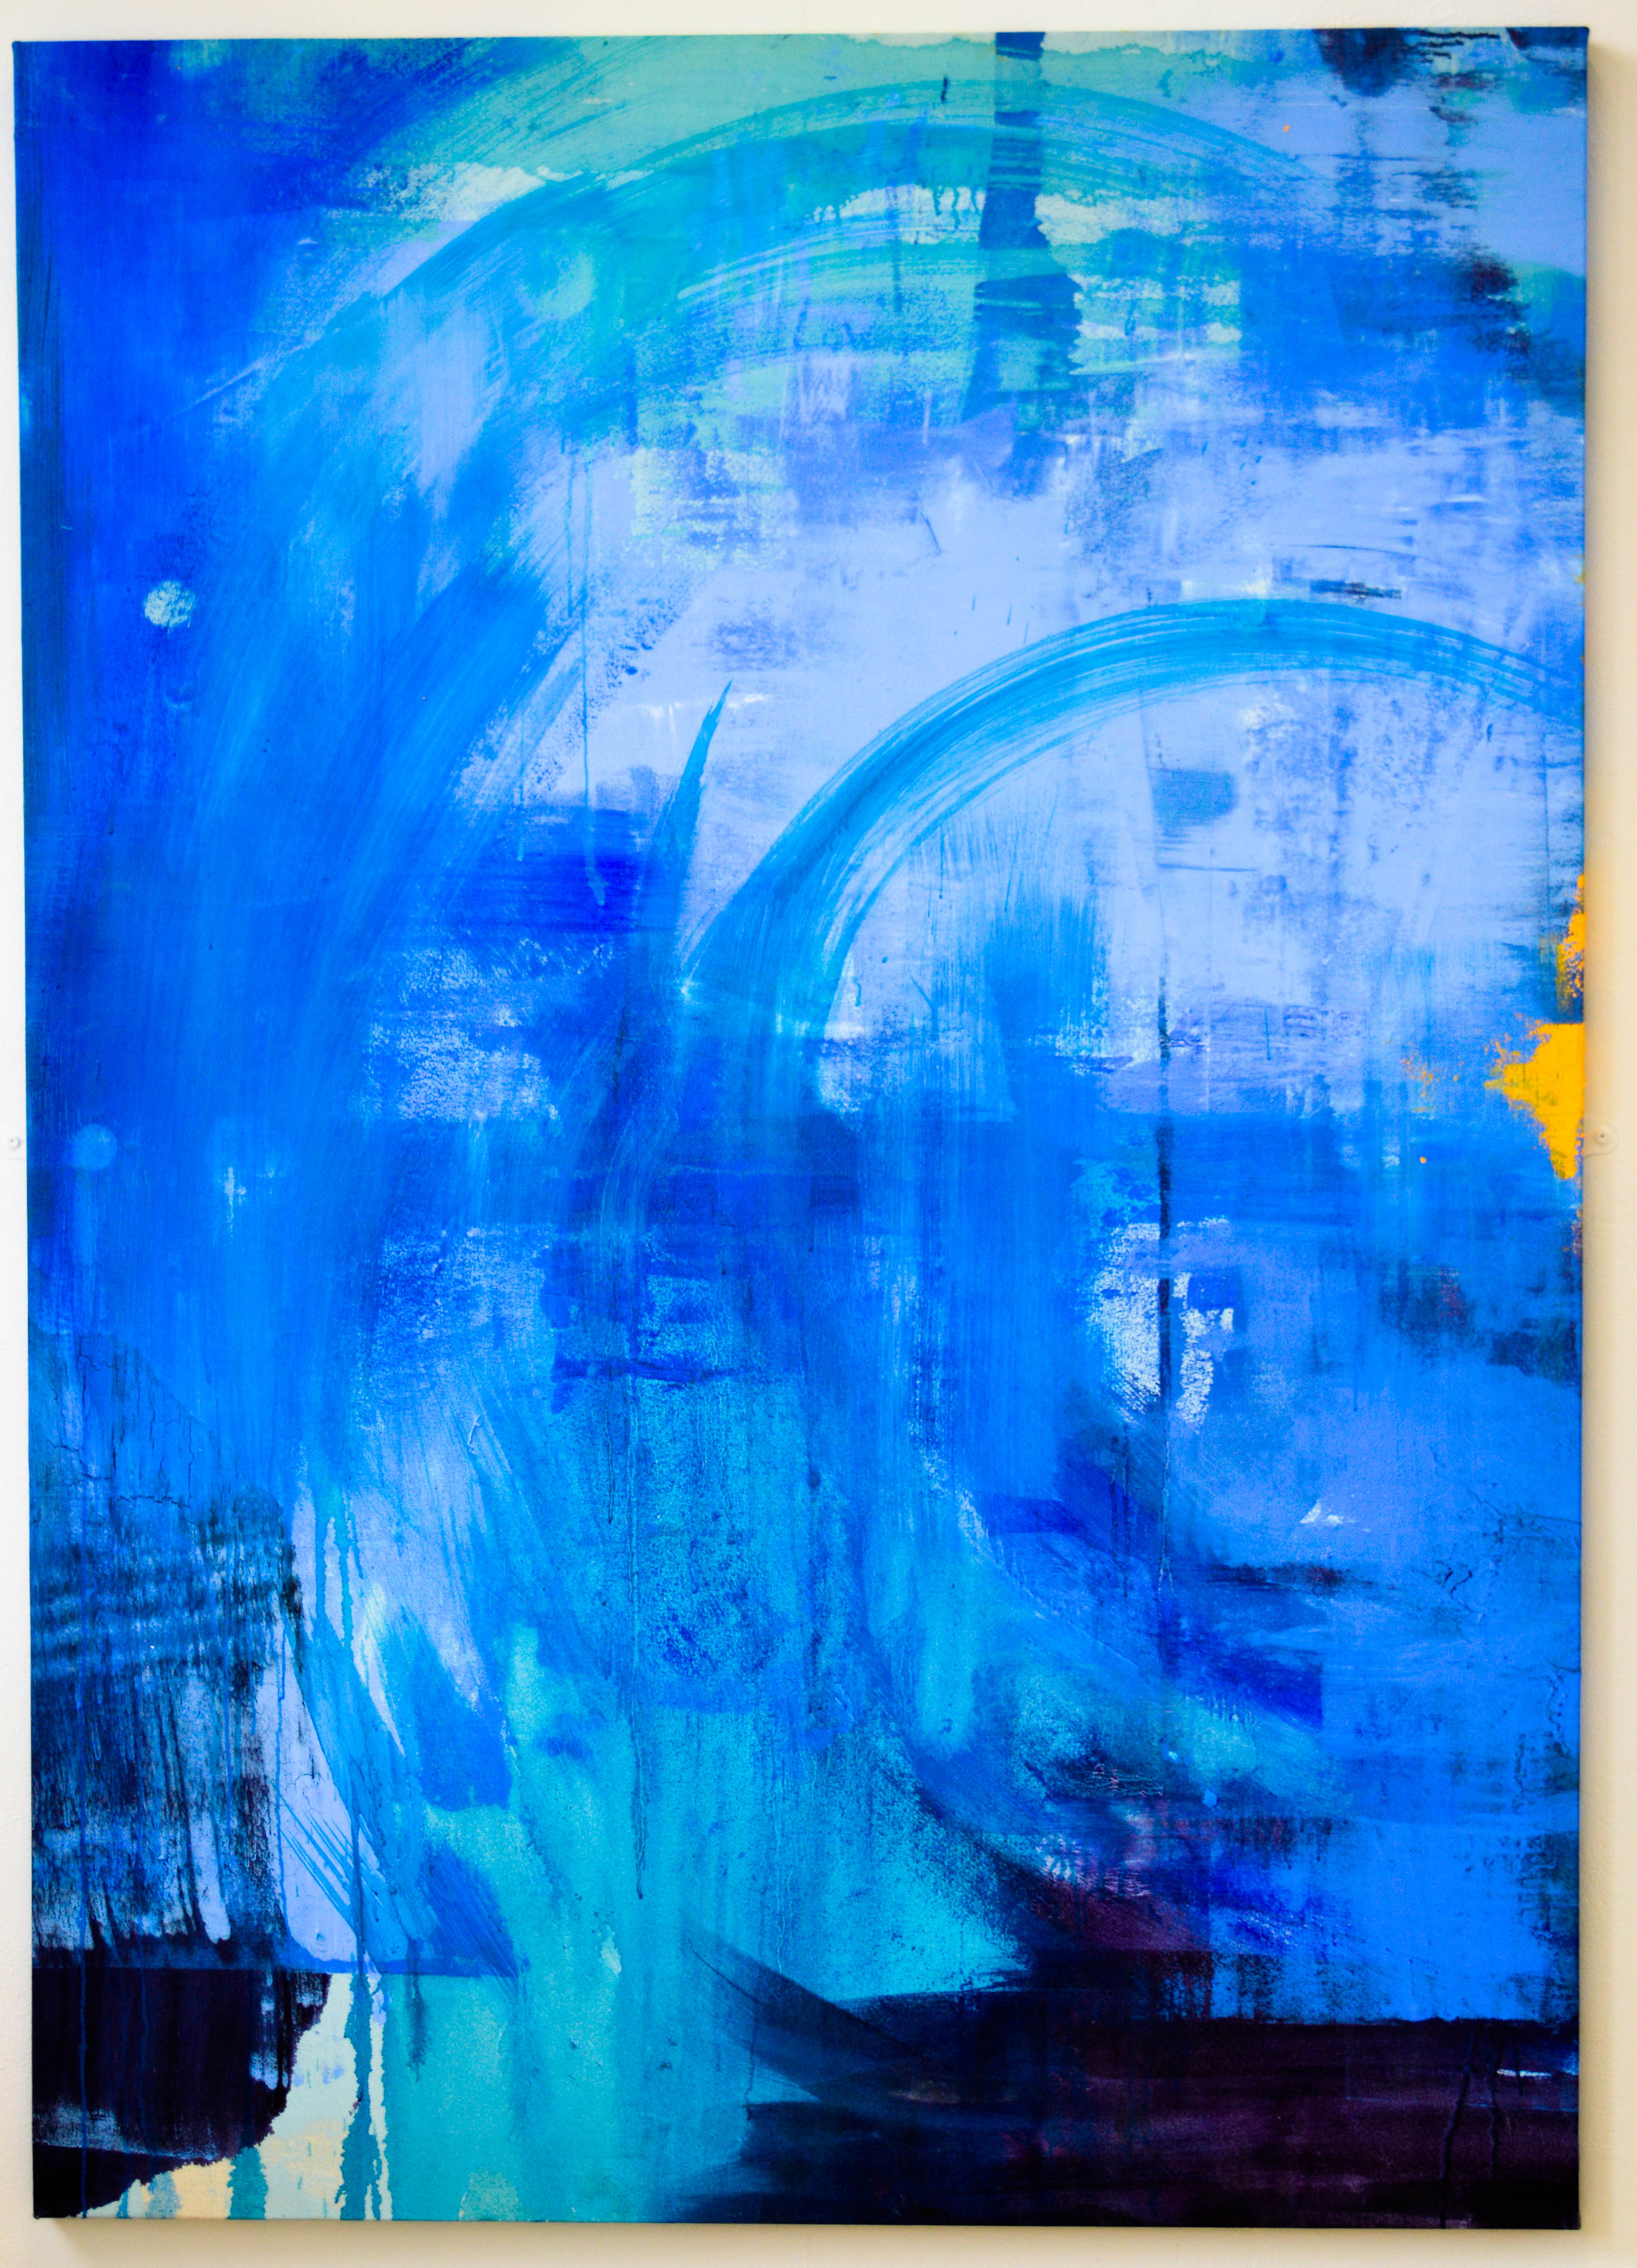 Blue Series 3.2. Oil on canvas. 190.8x114.5cm. For sale.